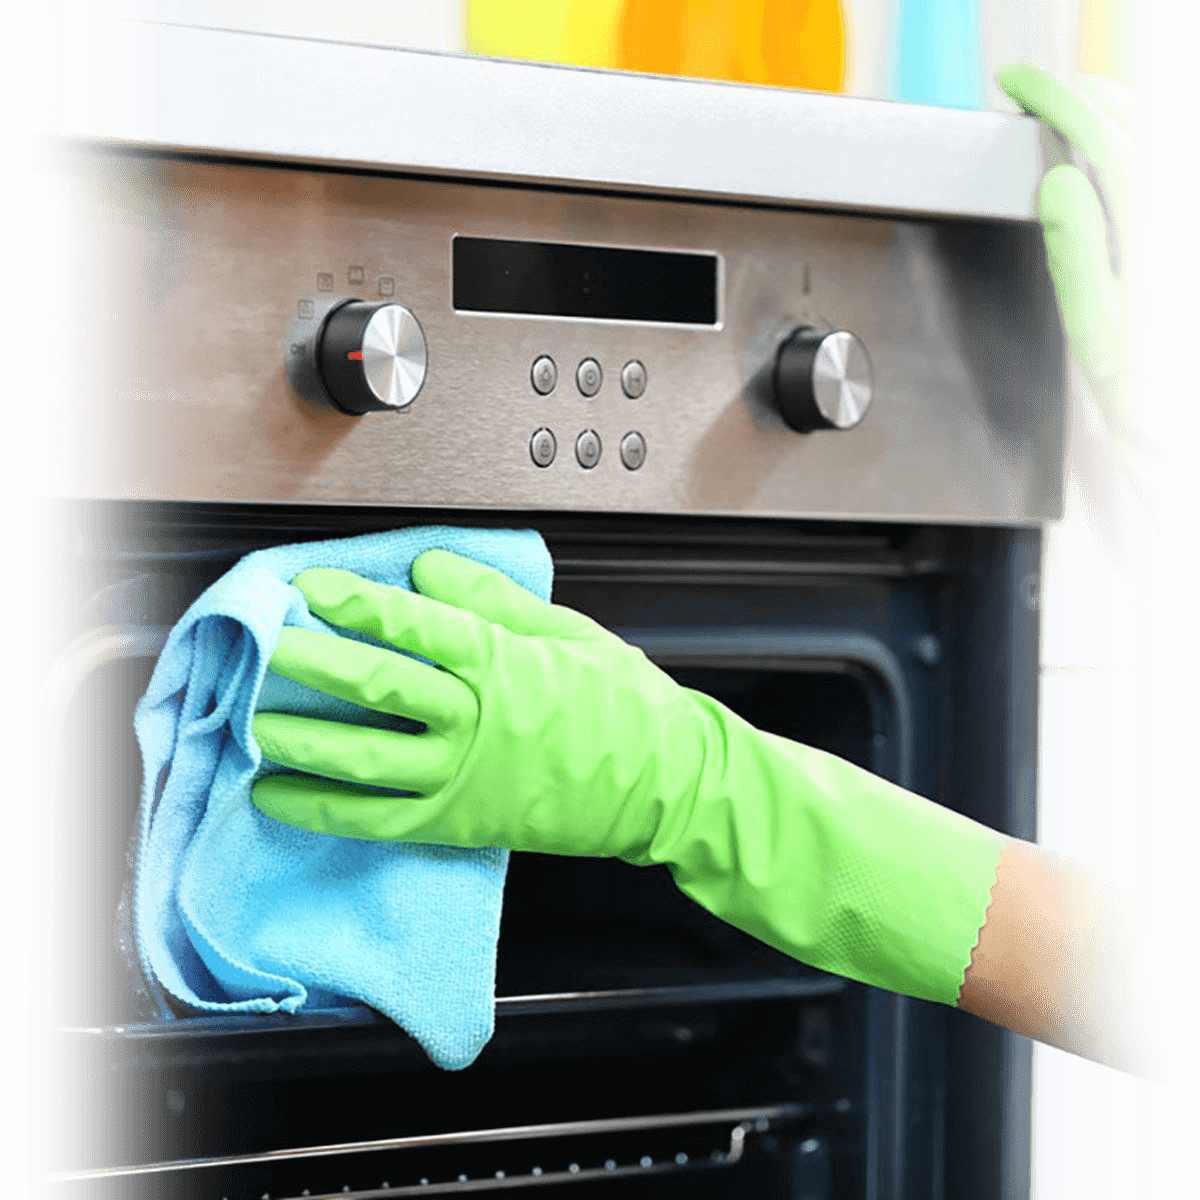 https://www.favouritecleaning.co.uk/wp-content/uploads/2020/11/slider-ovencleaning.png